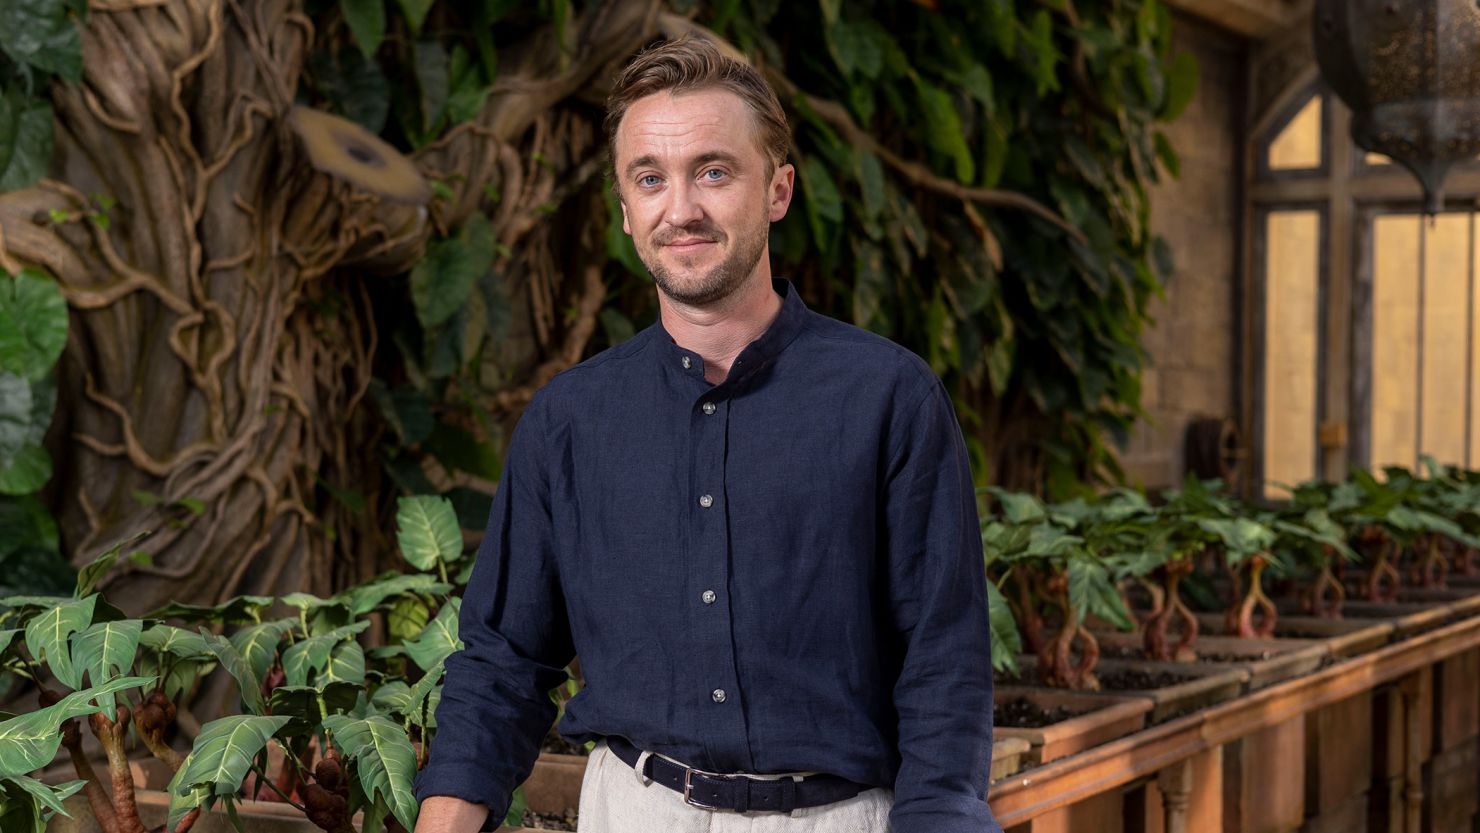 Tom Felton, seen here an event on June 21, 2022 in Watford, England, opens up about his struggles with mental health and substance abuse in his new book, "Beyond the Wand: The Magic and Mayhem of Growing Up a Wizard."